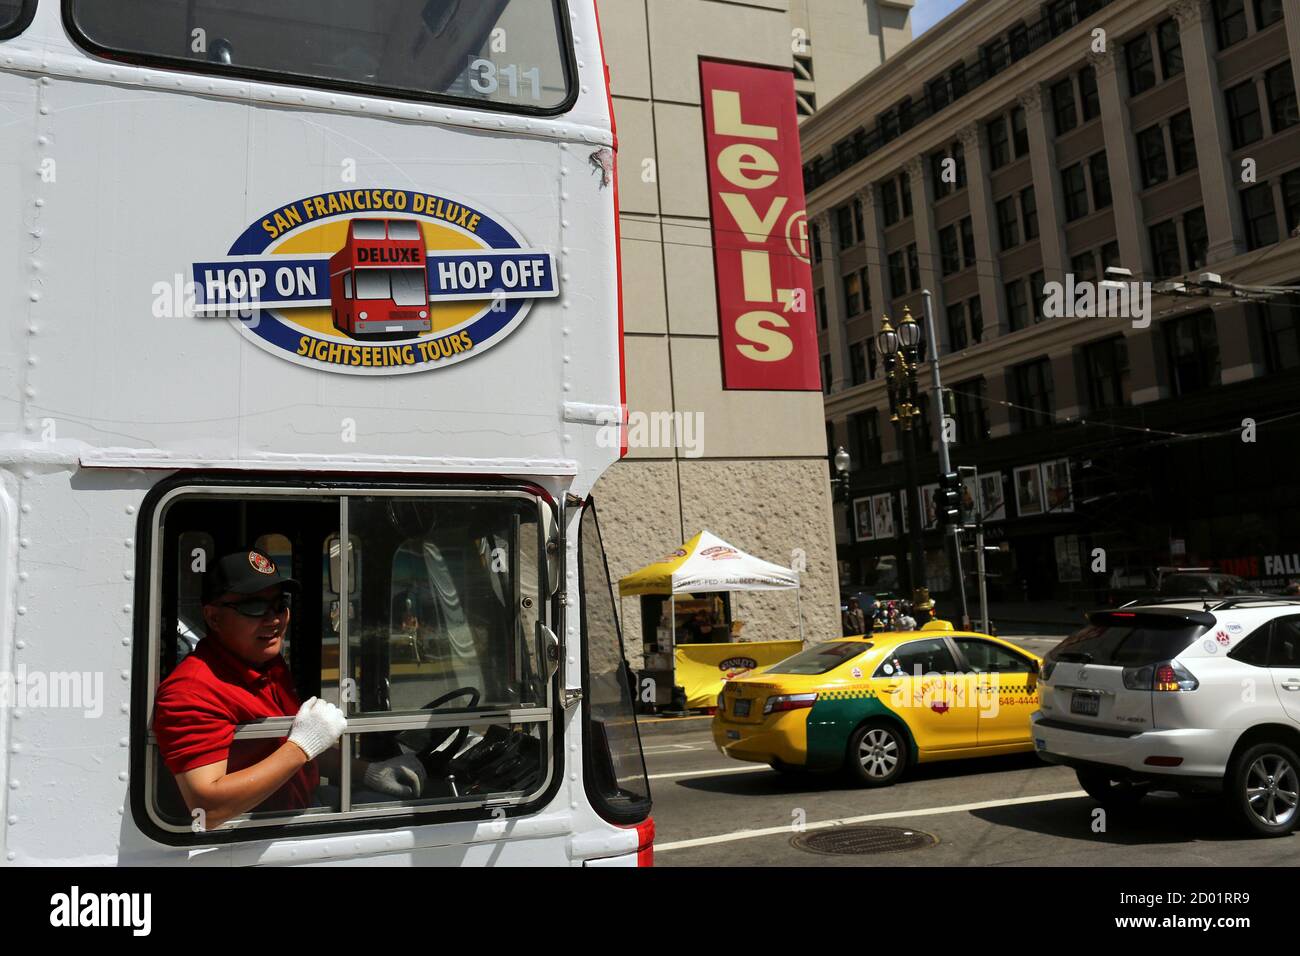 Levis store san francisco hi-res stock photography and images - Alamy